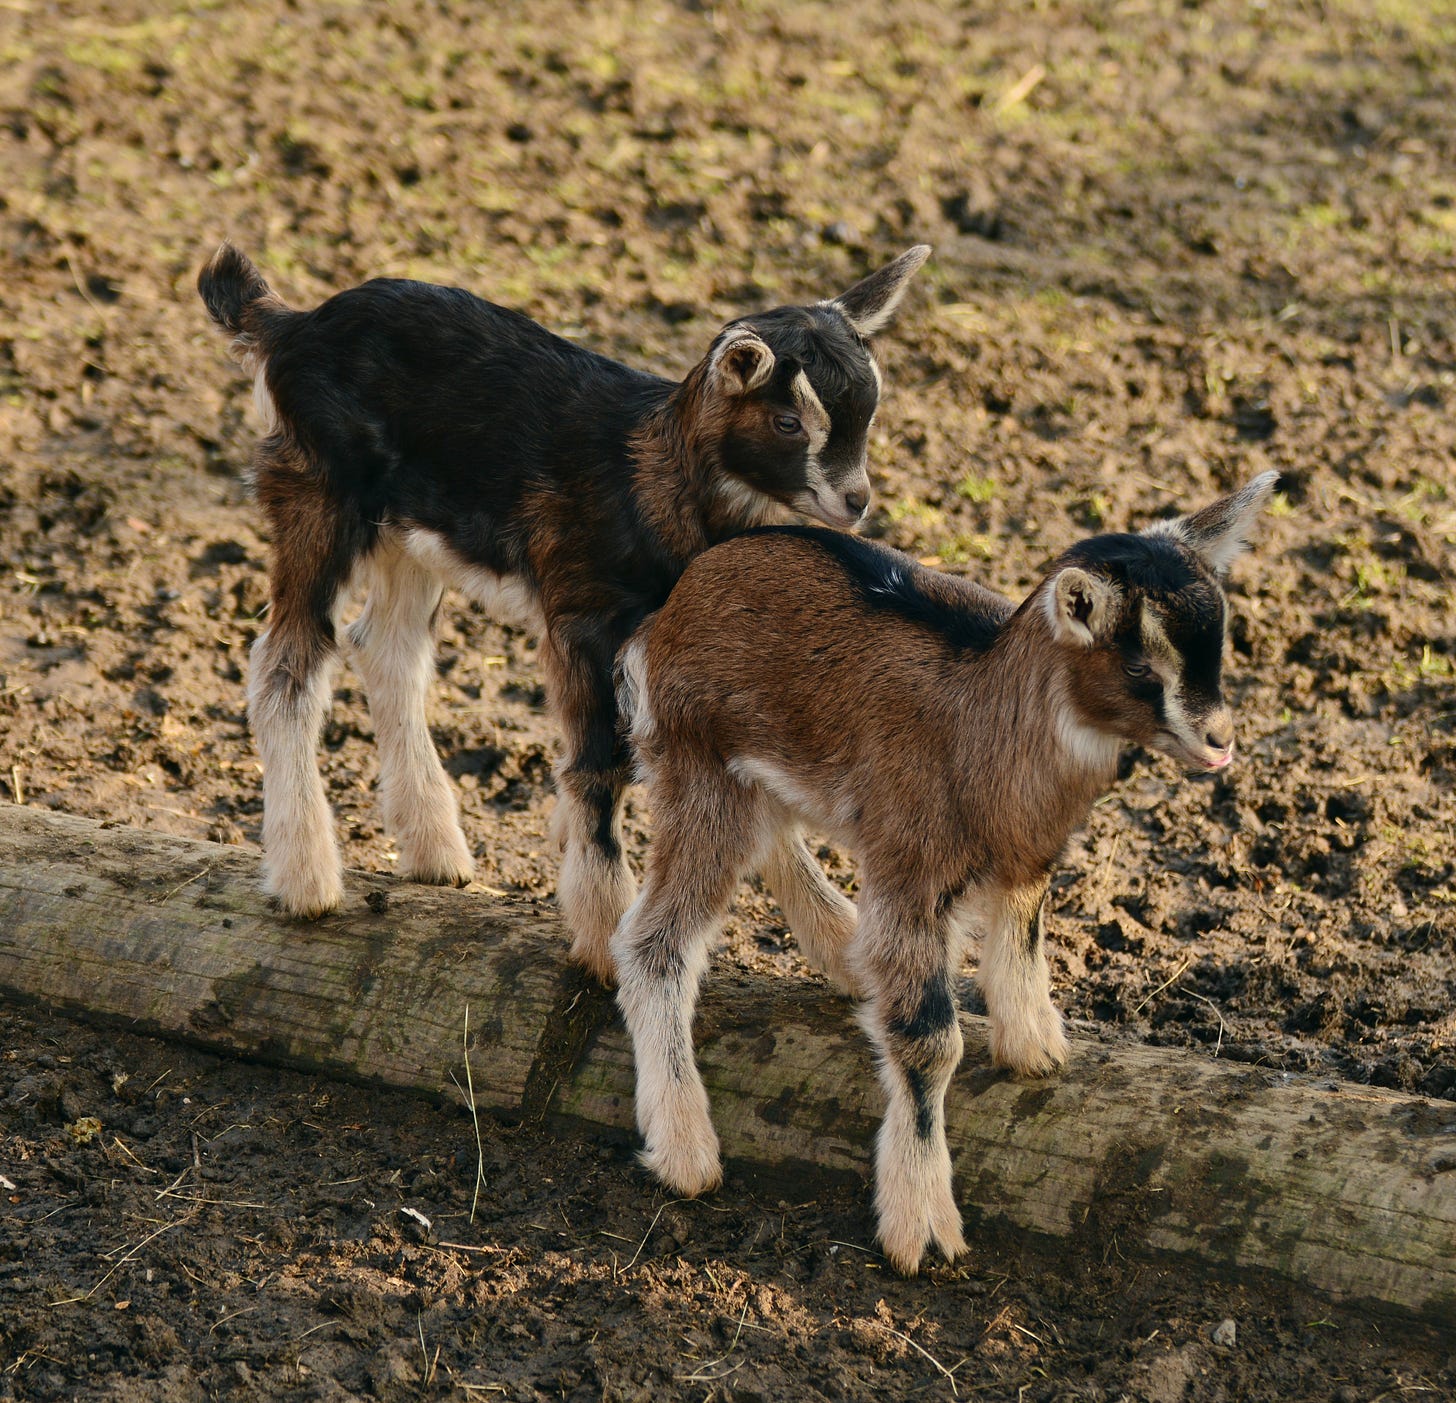 Two baby goats trying to balance on a beam